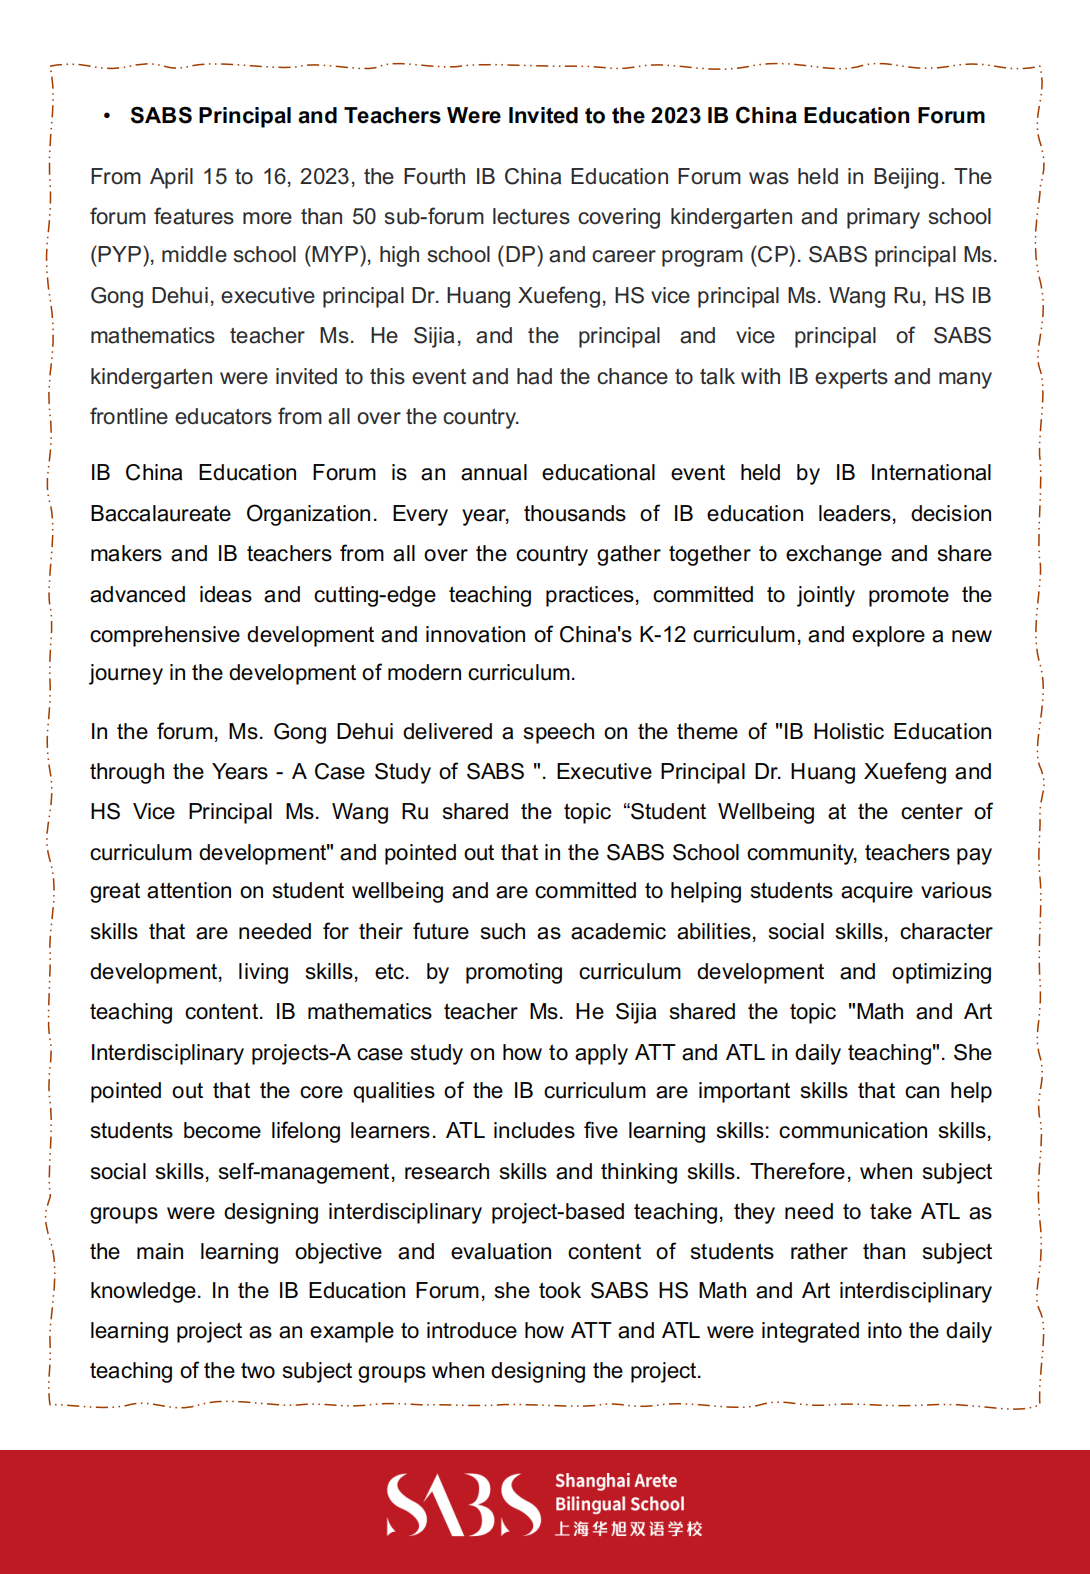 HS 5th Issue Newsletter pptx（English）_04.png